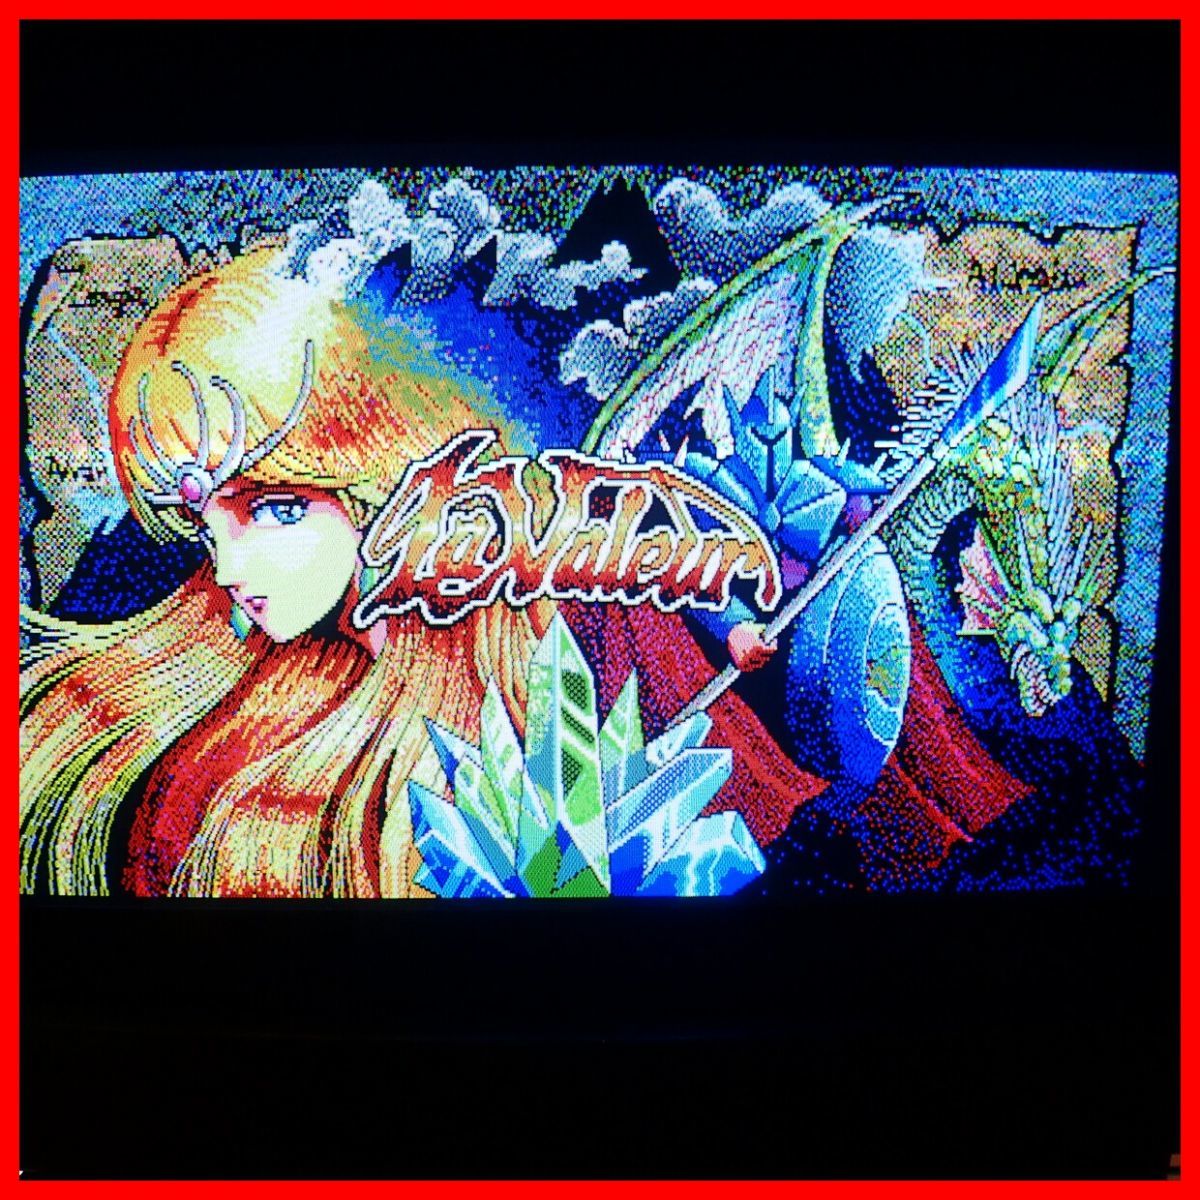 PC-9801 PC98 La Valeur, Game FDDs w/Manual and Box set, Working-f0804-